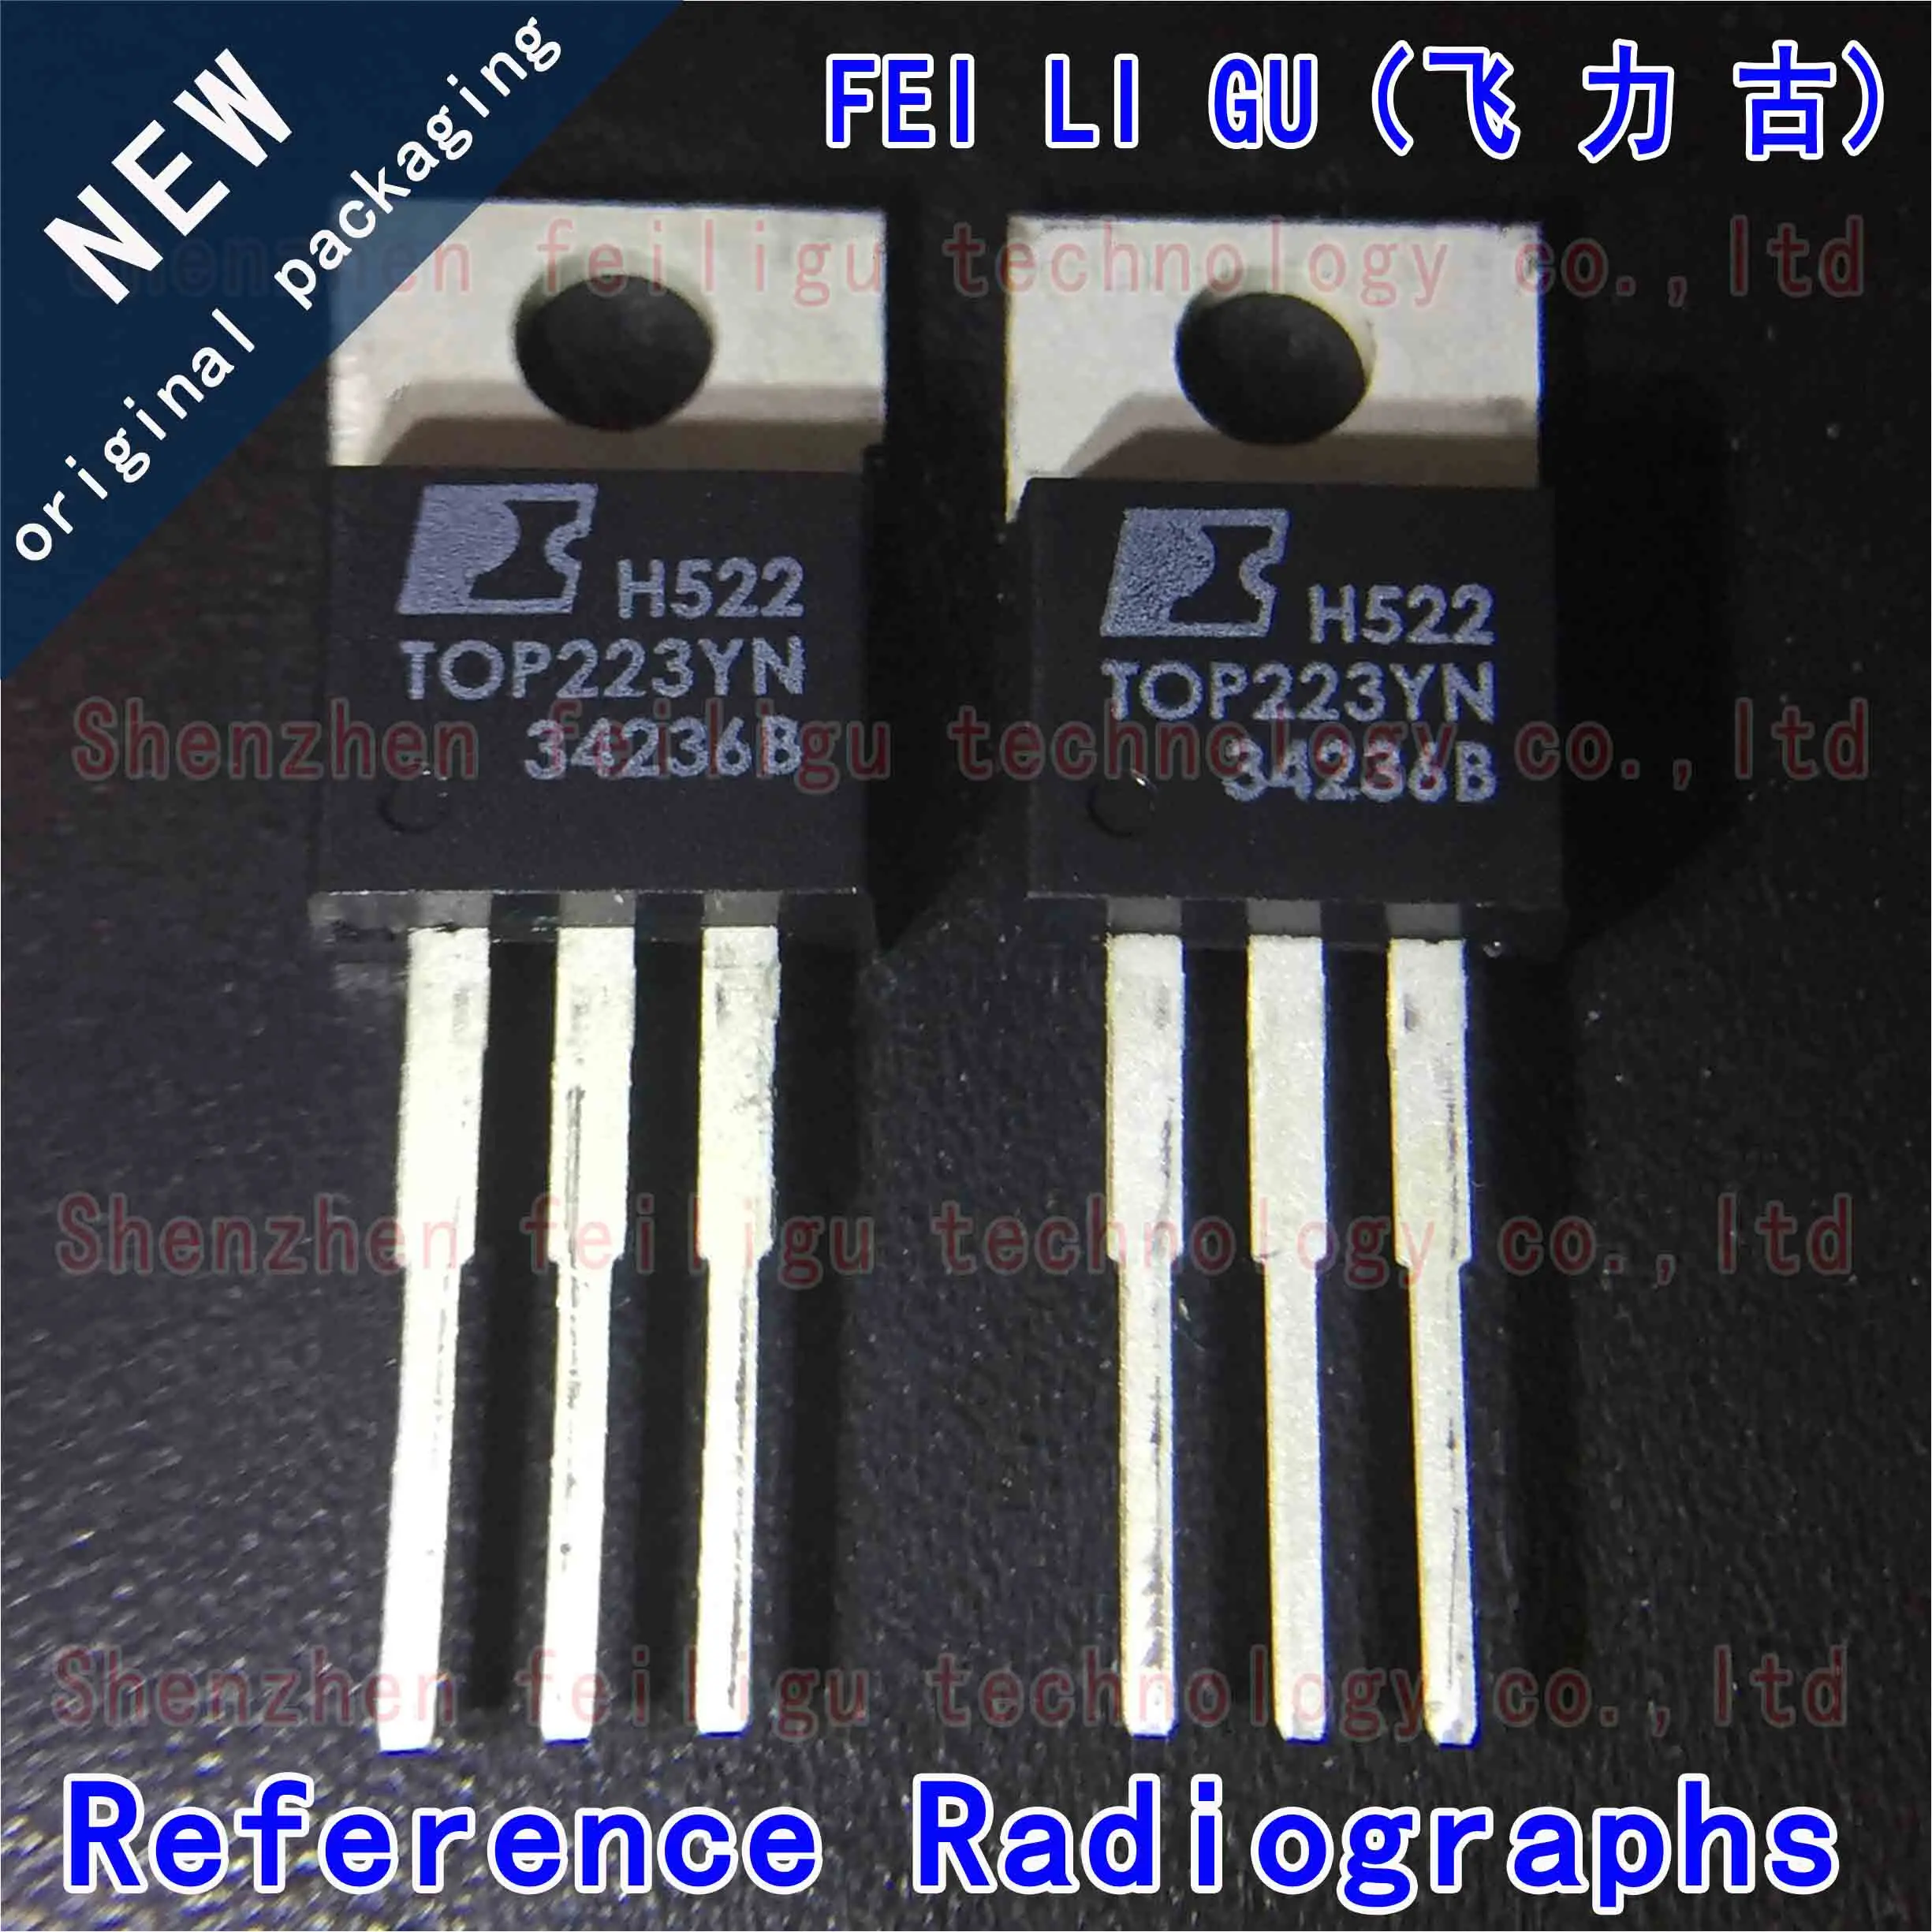 1~30PCS 100% New original TOP223YN TOP223 package:TO-220 plug AC-DC controller voltage regulator power management chip 1 30pcs 100% new original top255yn top255 package to 220 plug ac dc controller voltage regulator power management chip